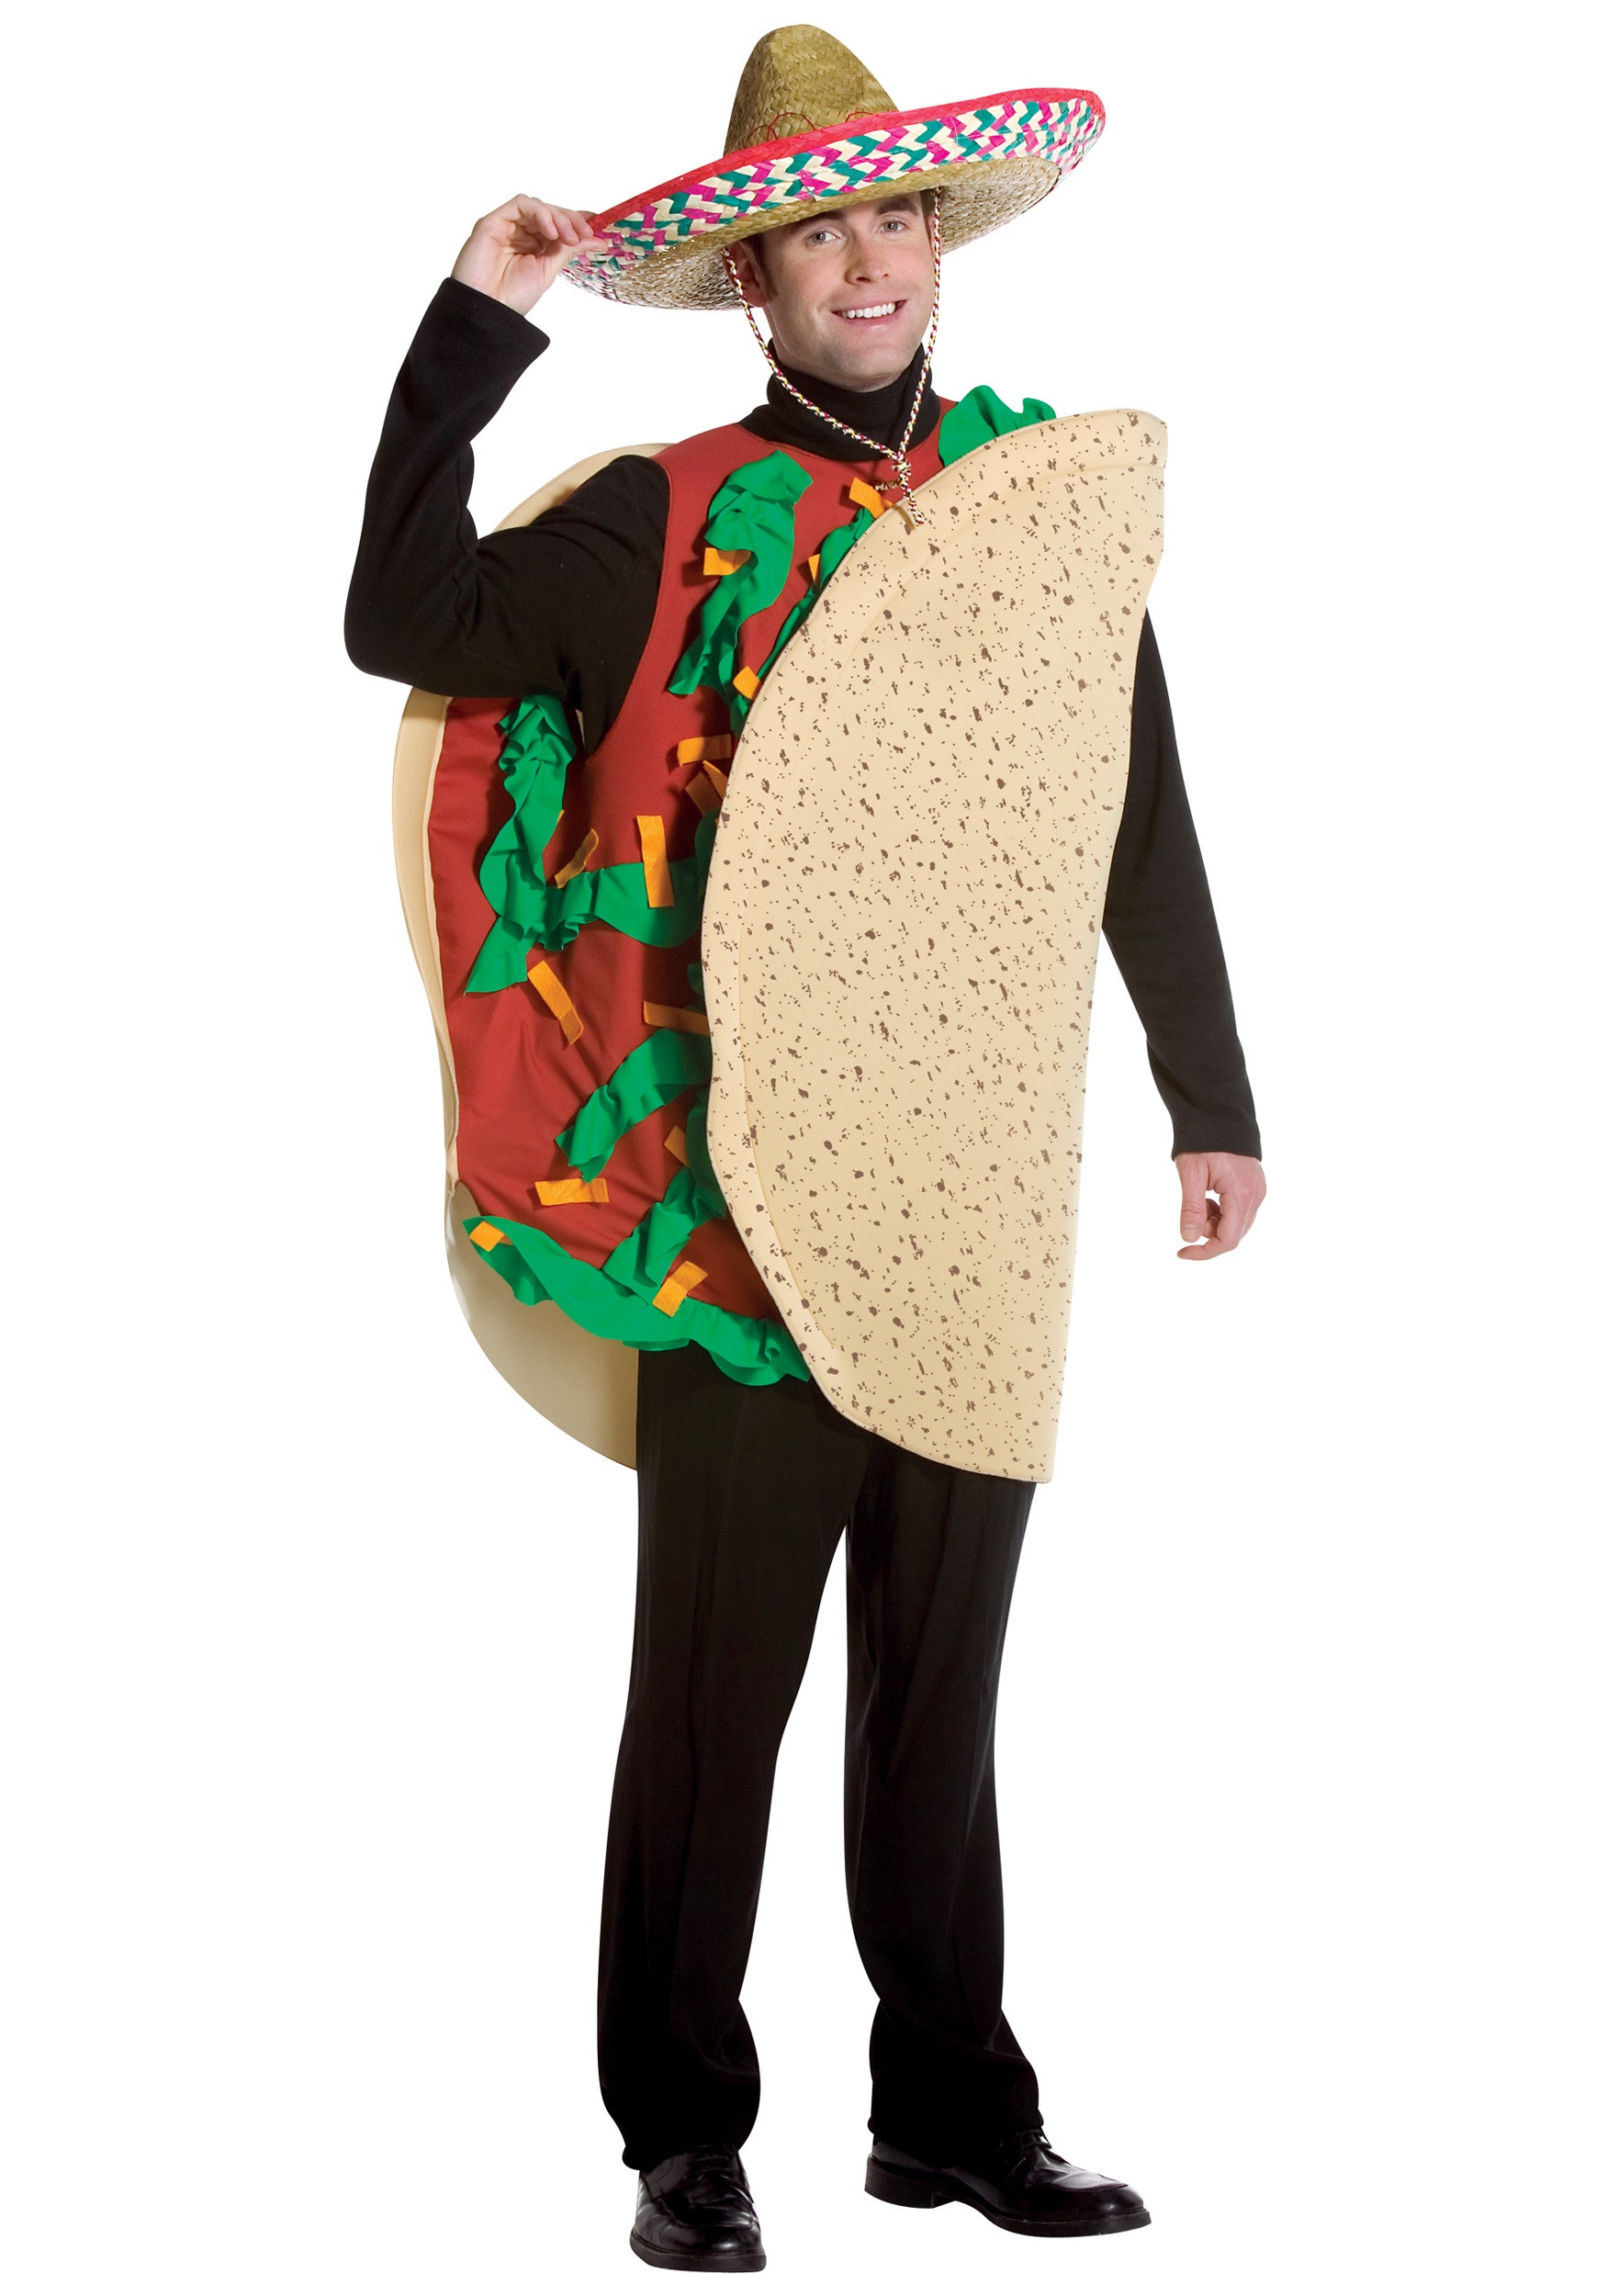 Halloween Party Costume Ideas For Guys
 Mens Hot Taco Costume Adult Funny Food Halloween Costumes